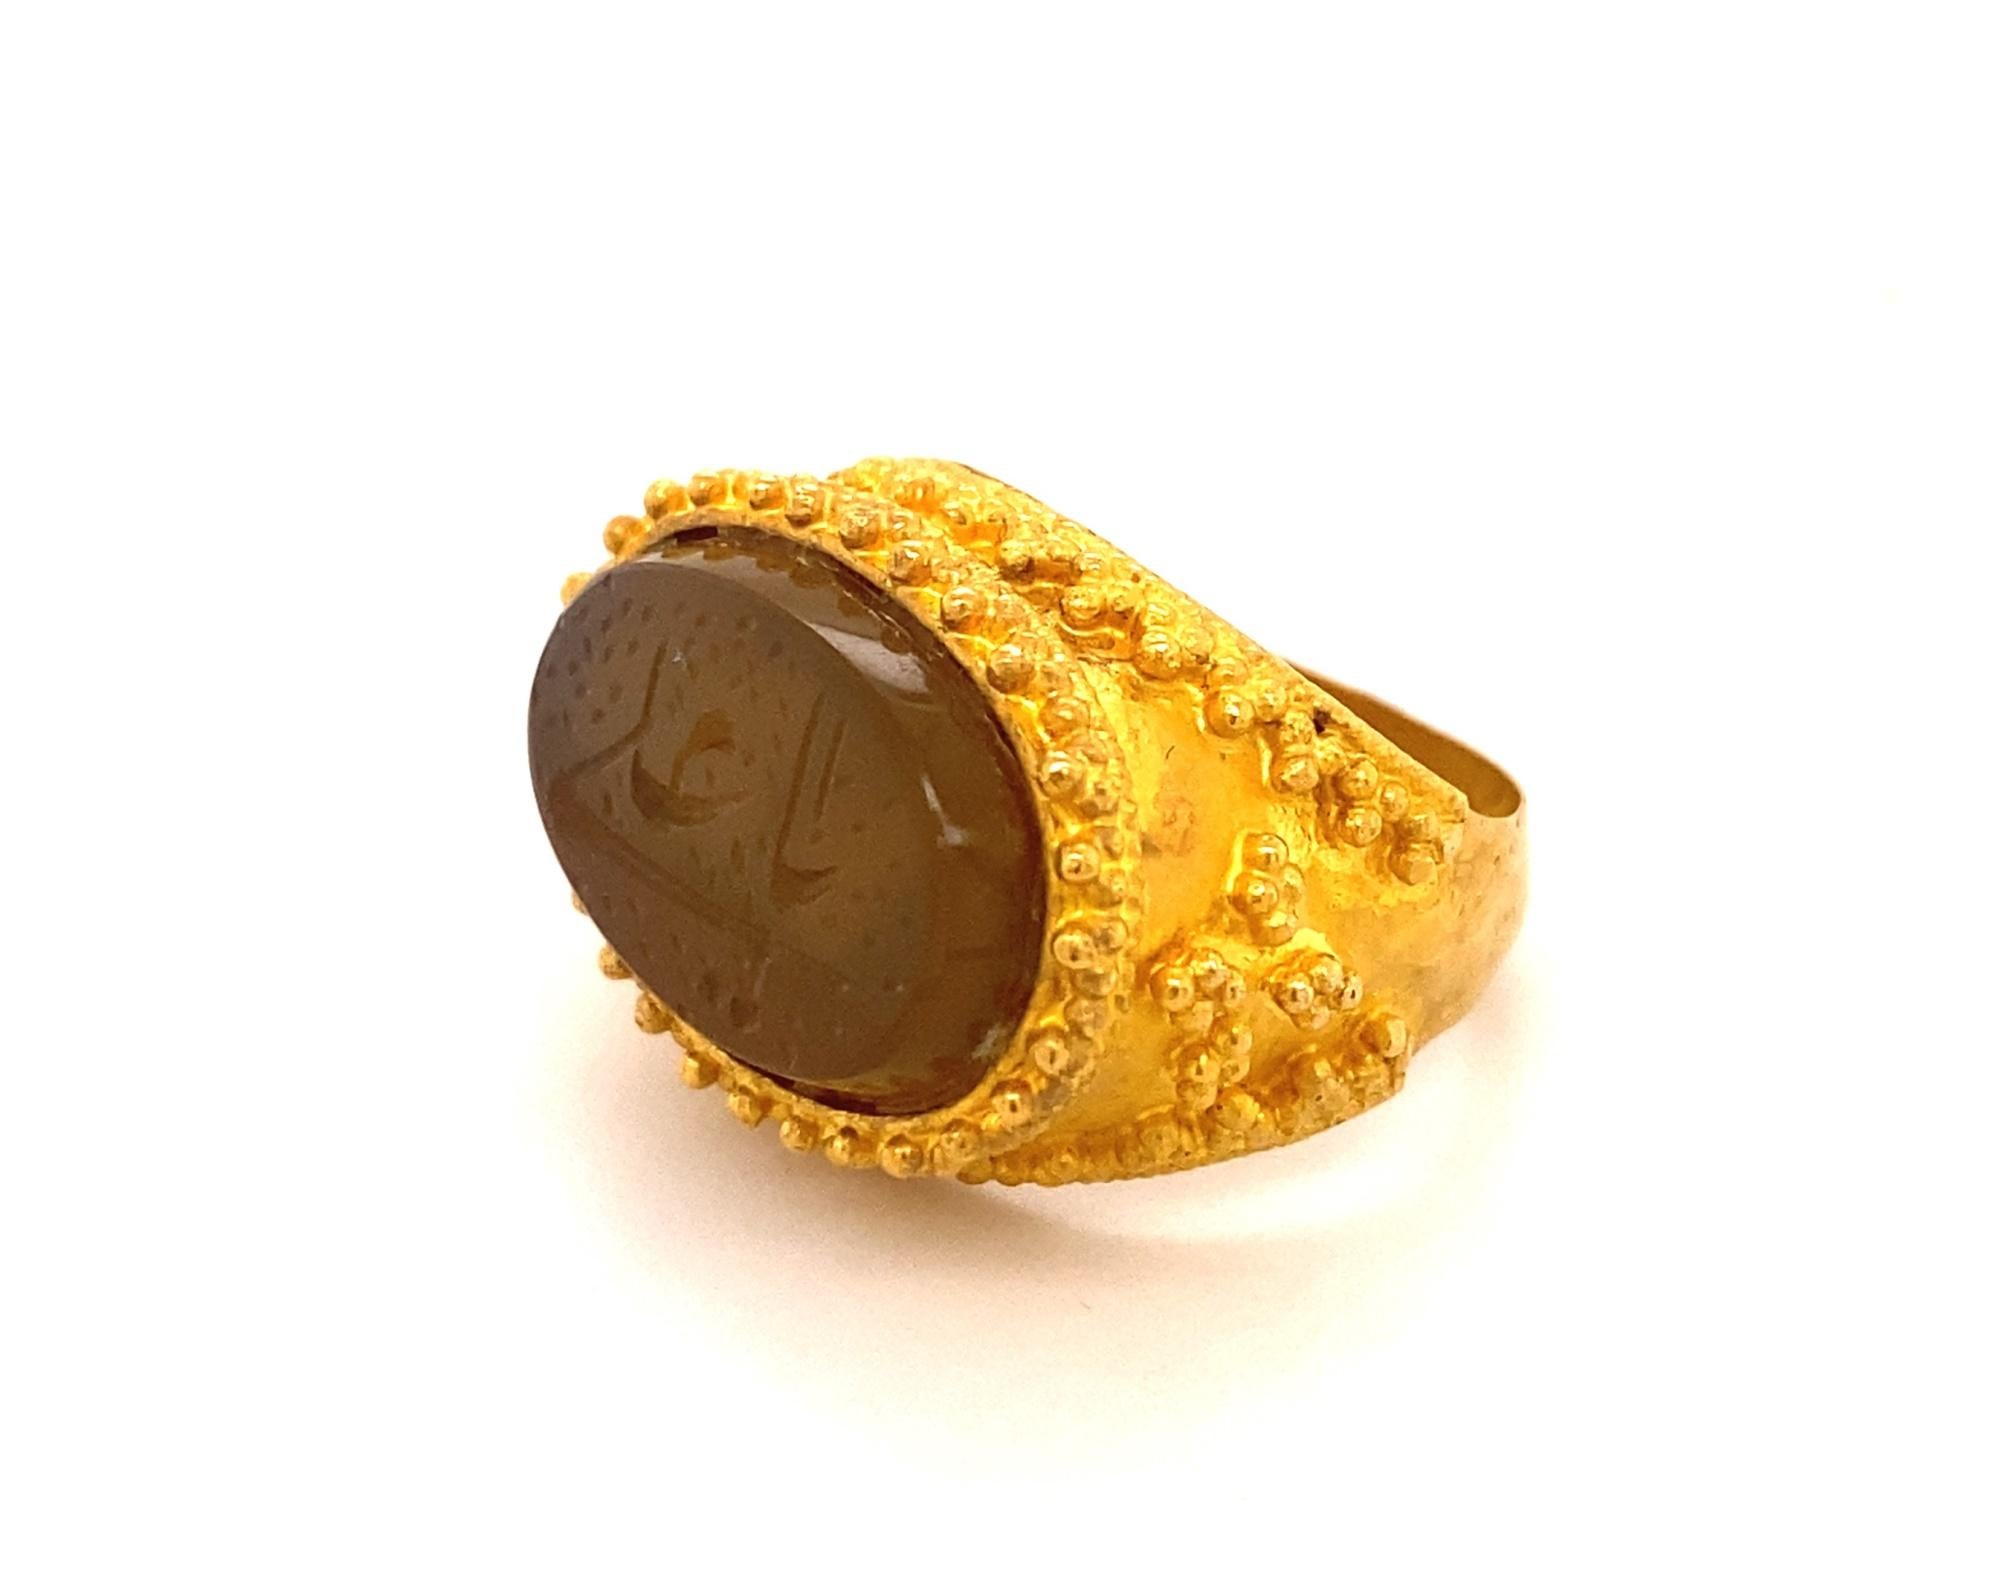 This is stunning antique ring made in high karat gold with crown like design. The agate portion has carved Arabic writing. The agate portion measures 18mm by 11mm. The ring has no hallmarks been tested for 22k gold possibly made in 24K. The setting